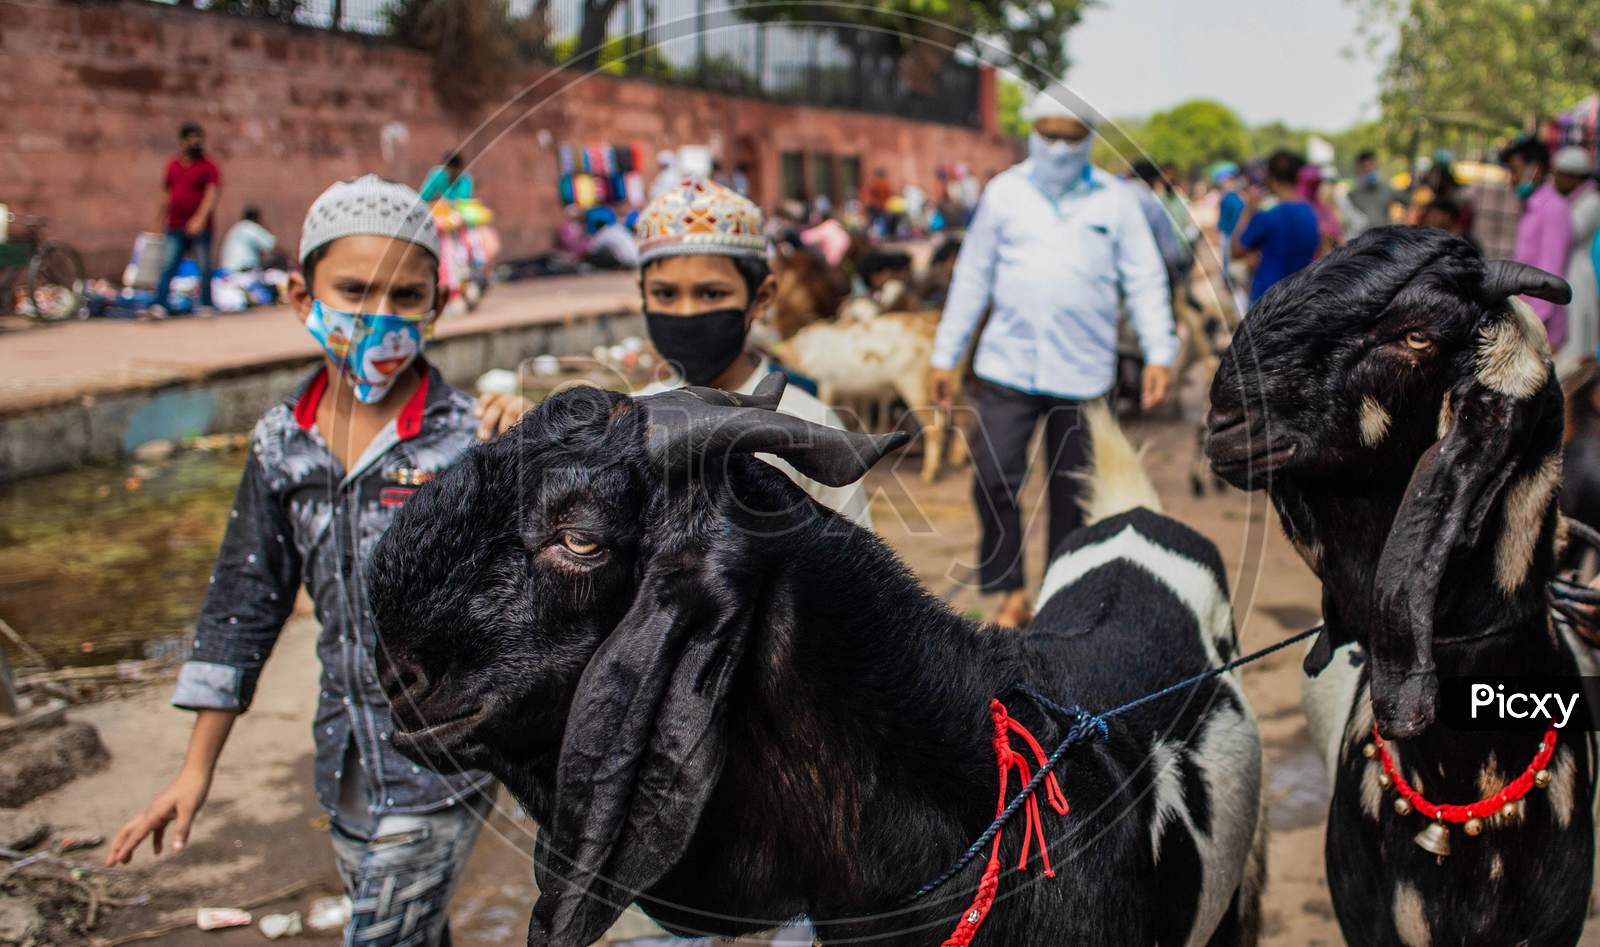 A Live-Stock Trader Waits For Customers At A Livestock Market, Ahead Of The Sacrificial Eid Al-Adha Festival, At Jama Masjid On July 23, 2020 In New Delhi, India.